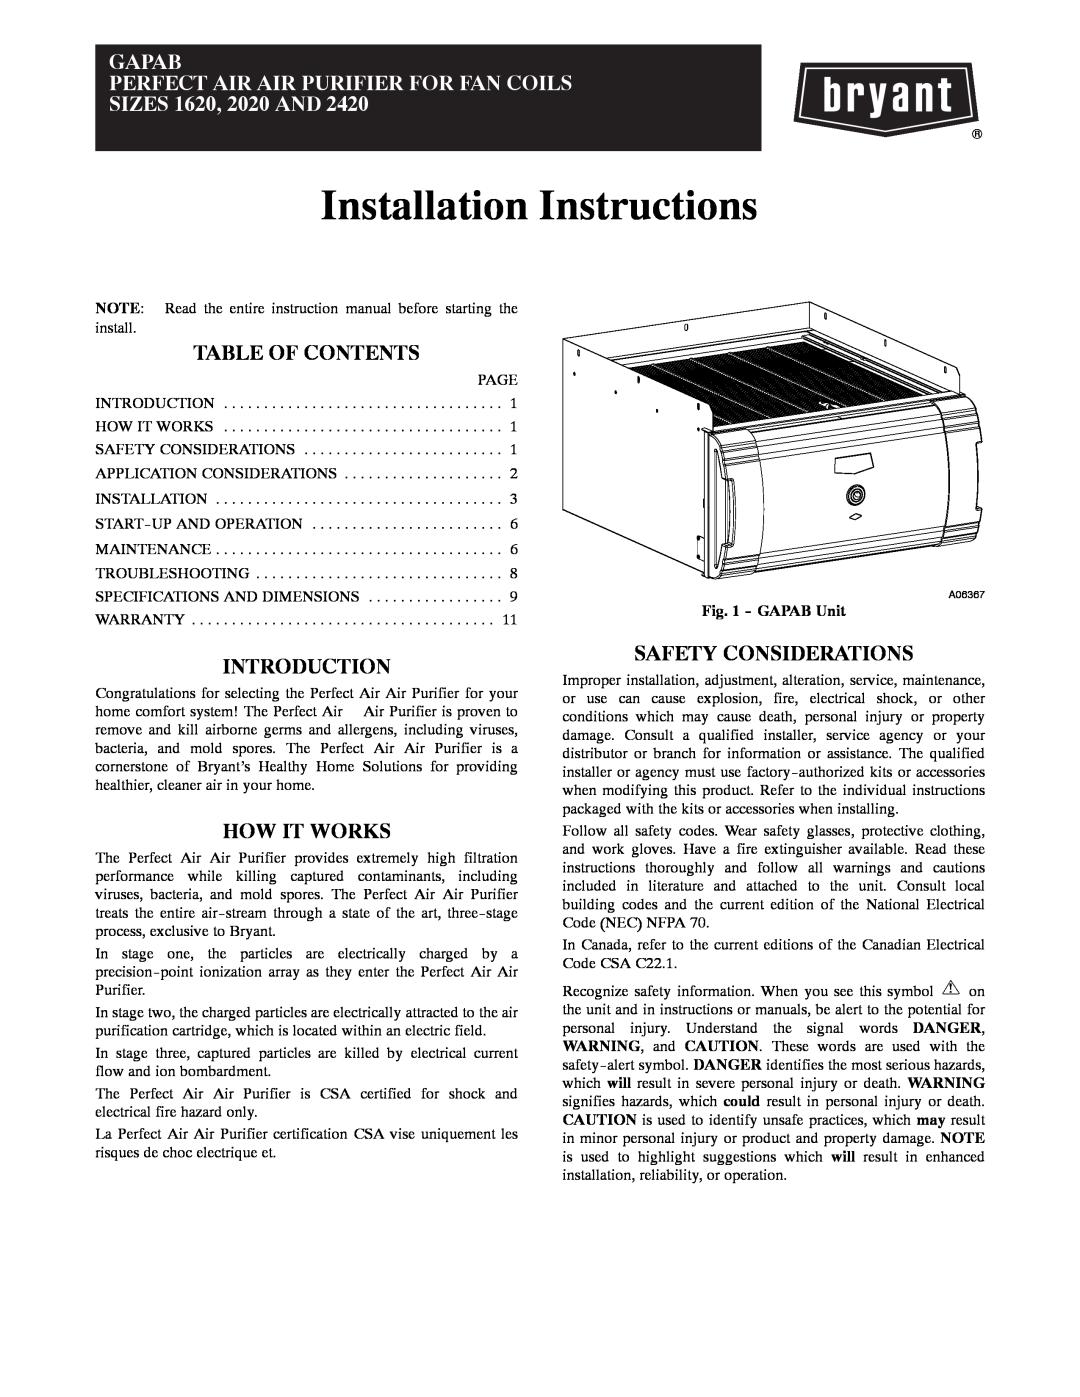 Bryant 1620 installation instructions Table Of Contents, Introduction, How It Works, Safety Considerations, GAPAB Unit 